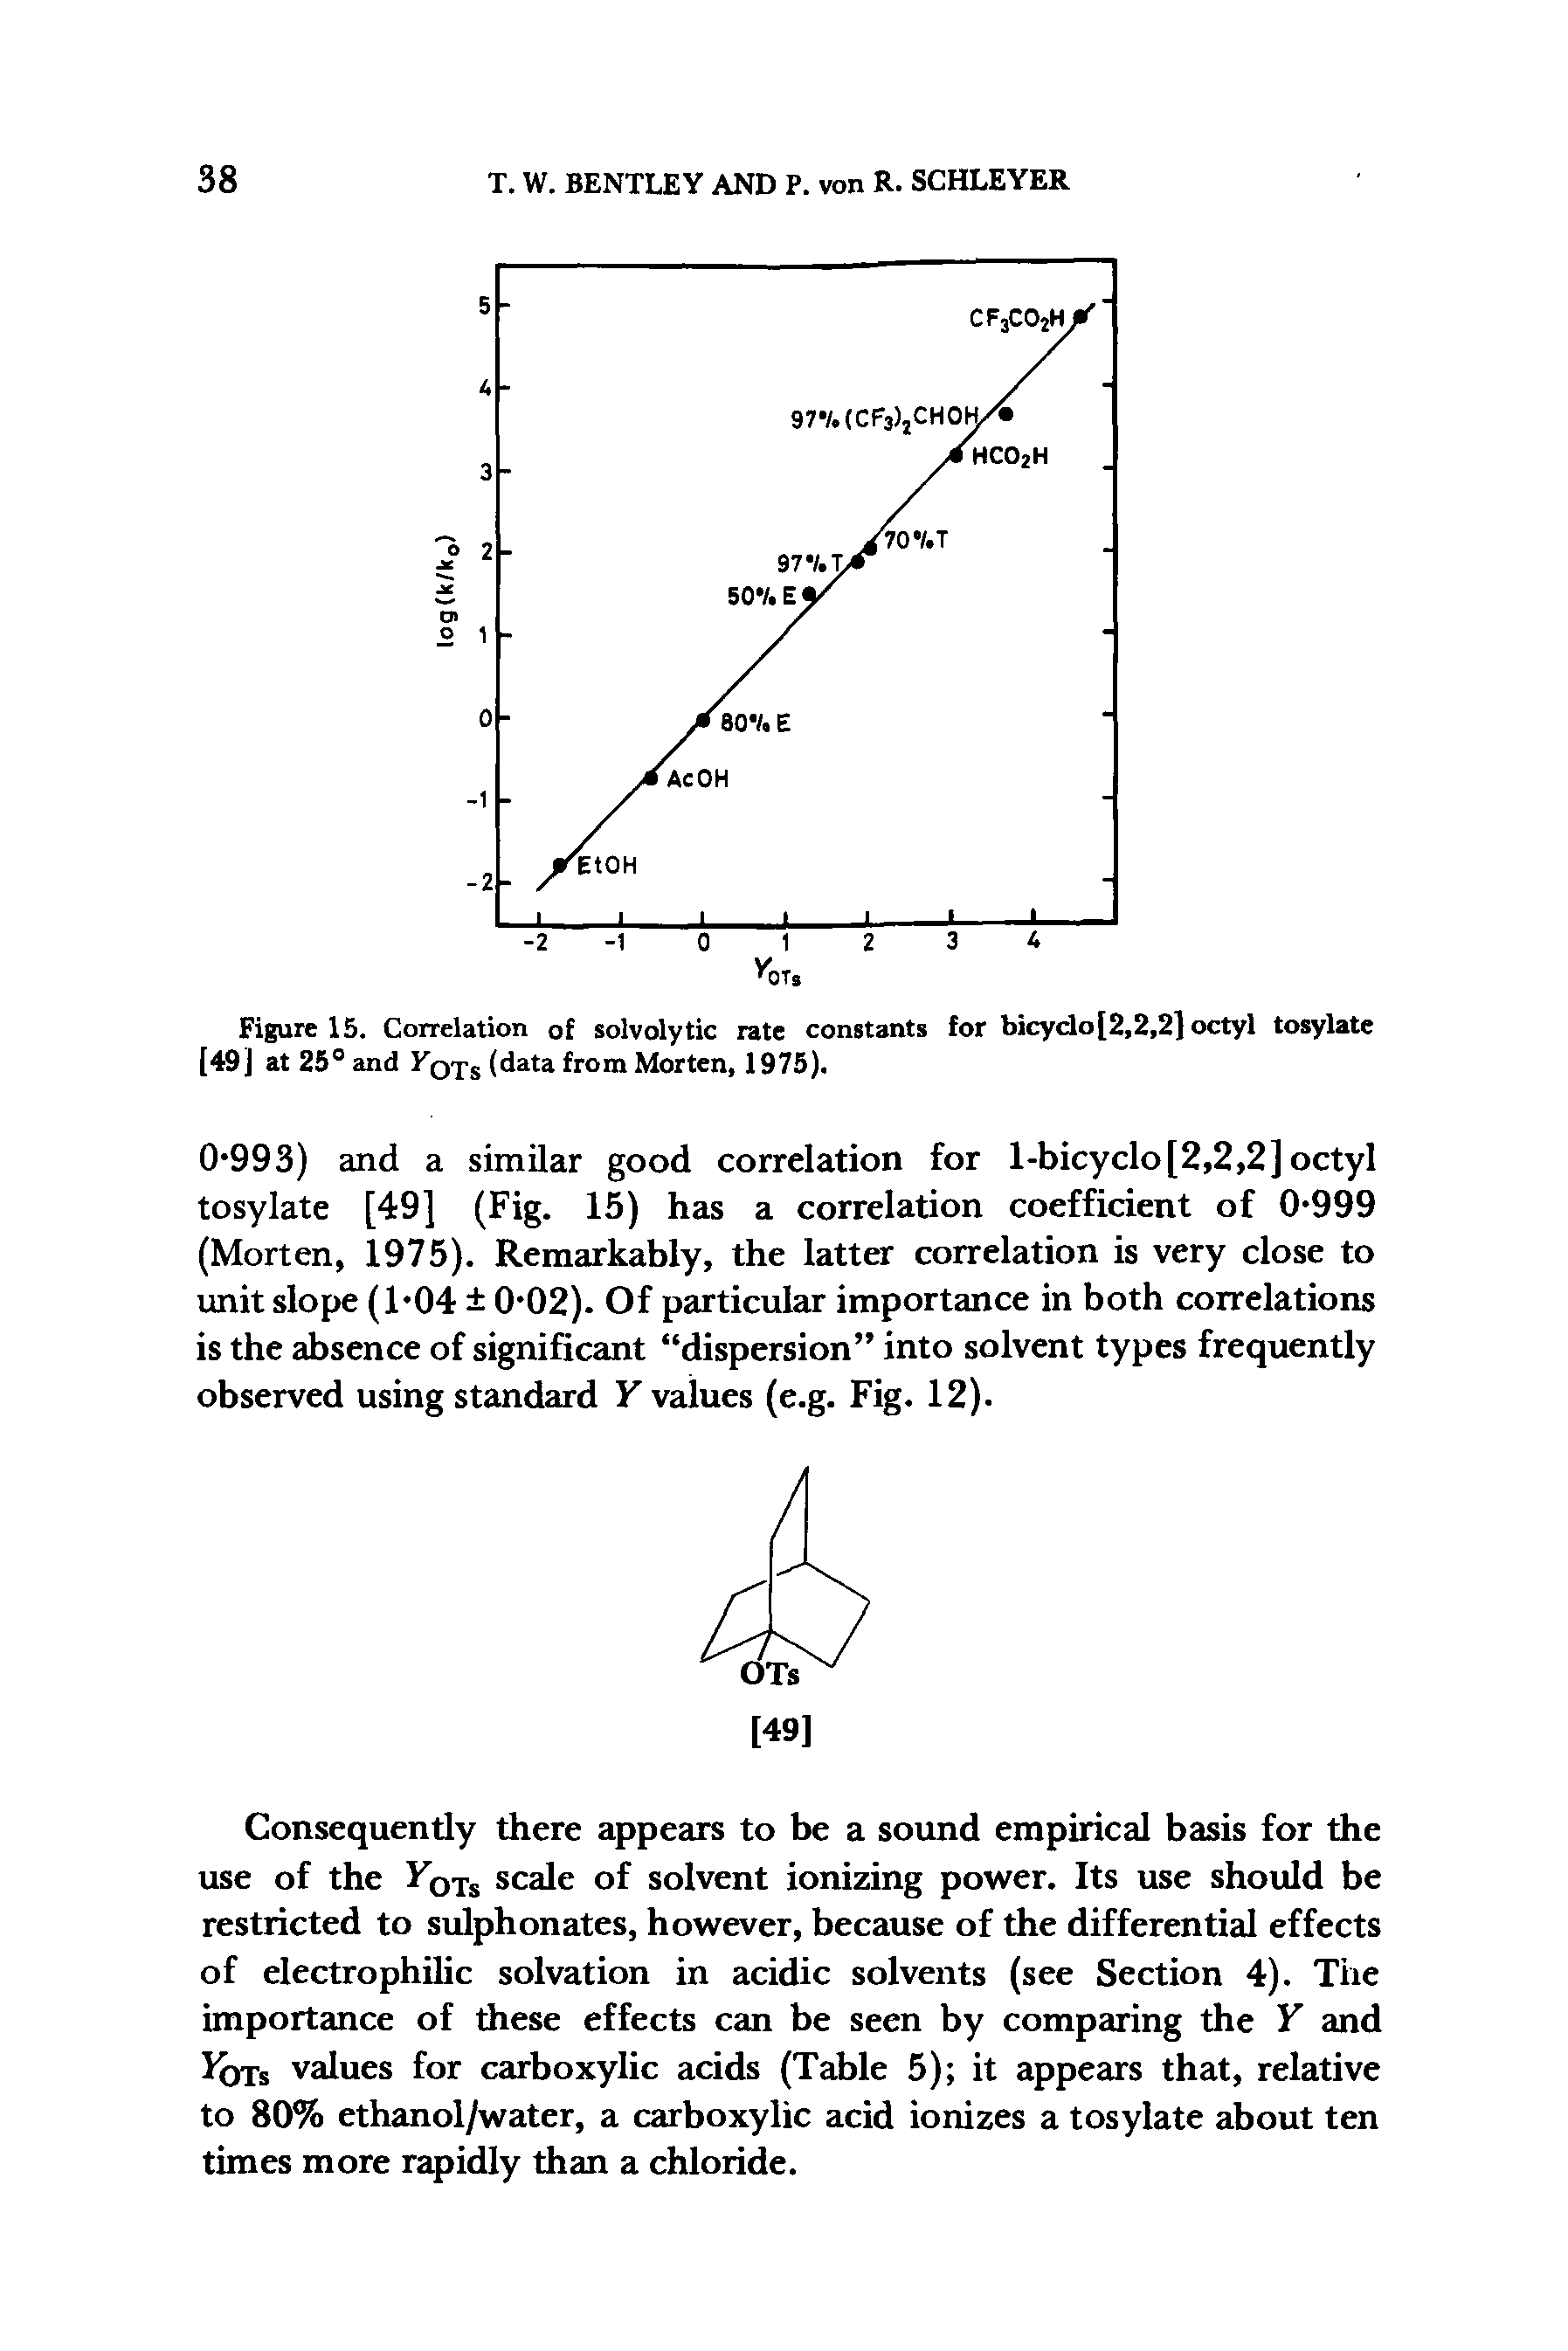 Figure 15. Correlation of solvolytic rate constants for bicydo[2,2,2] octyl tosylate [49] at 25° and YqTs (data from Morten, 1975).